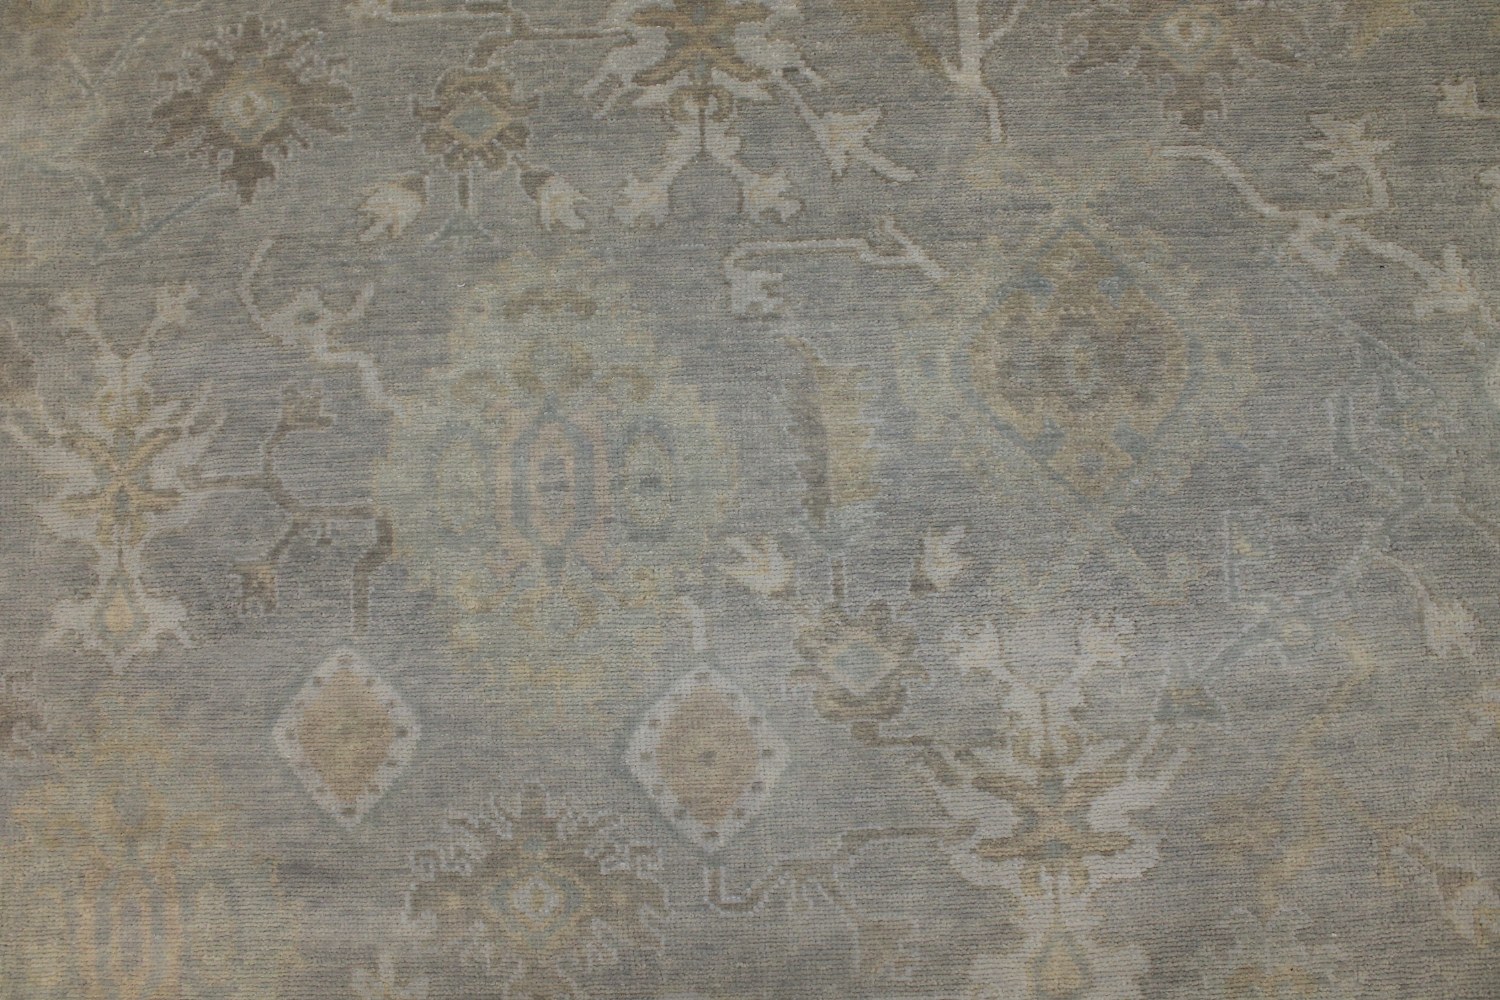 OVERSIZE Oushak Hand Knotted Wool Area Rug - MR028315